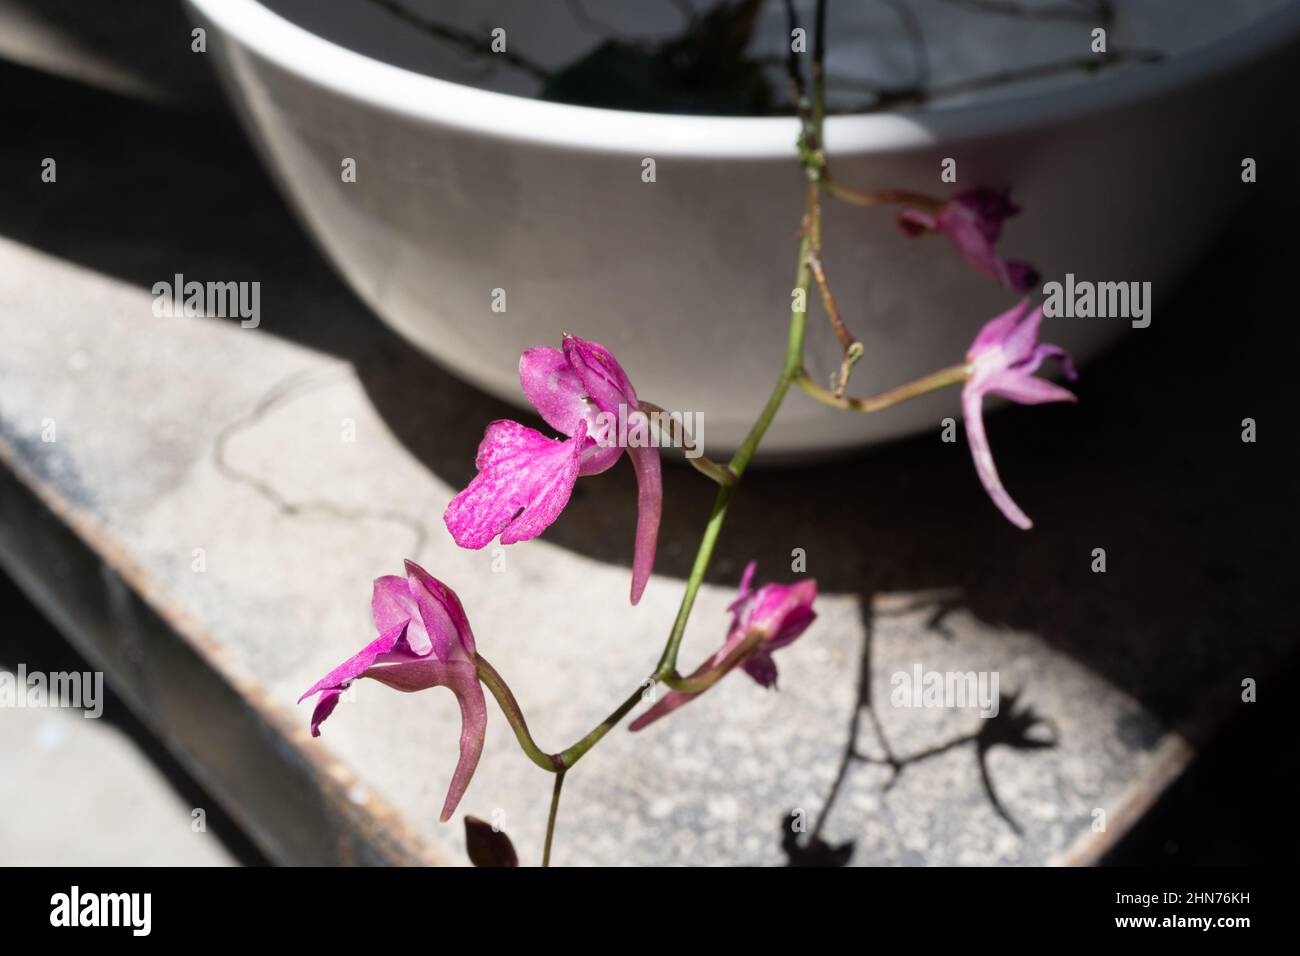 A newly collected Comparettia falcata orchid in bloom being rehydrated before planting. Stock Photo